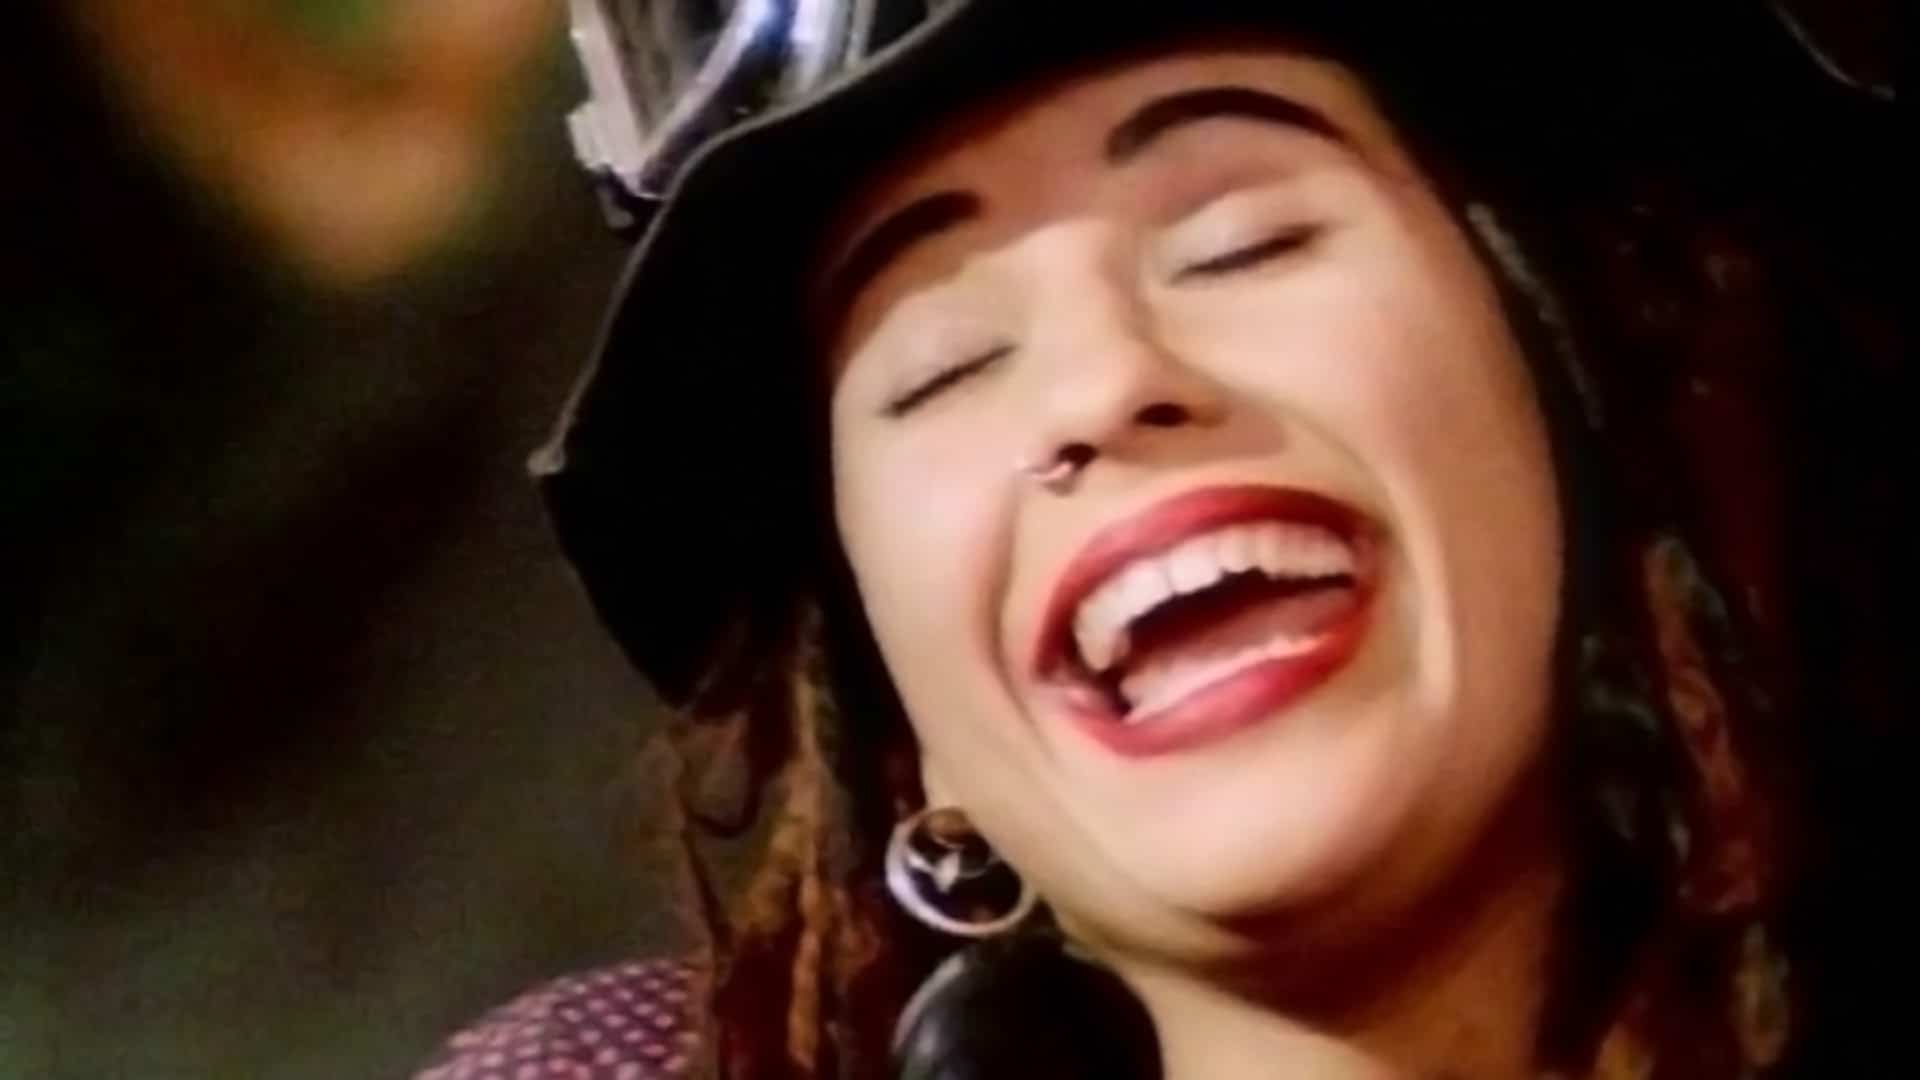 4 Non Blondes - What&apos;s Up?